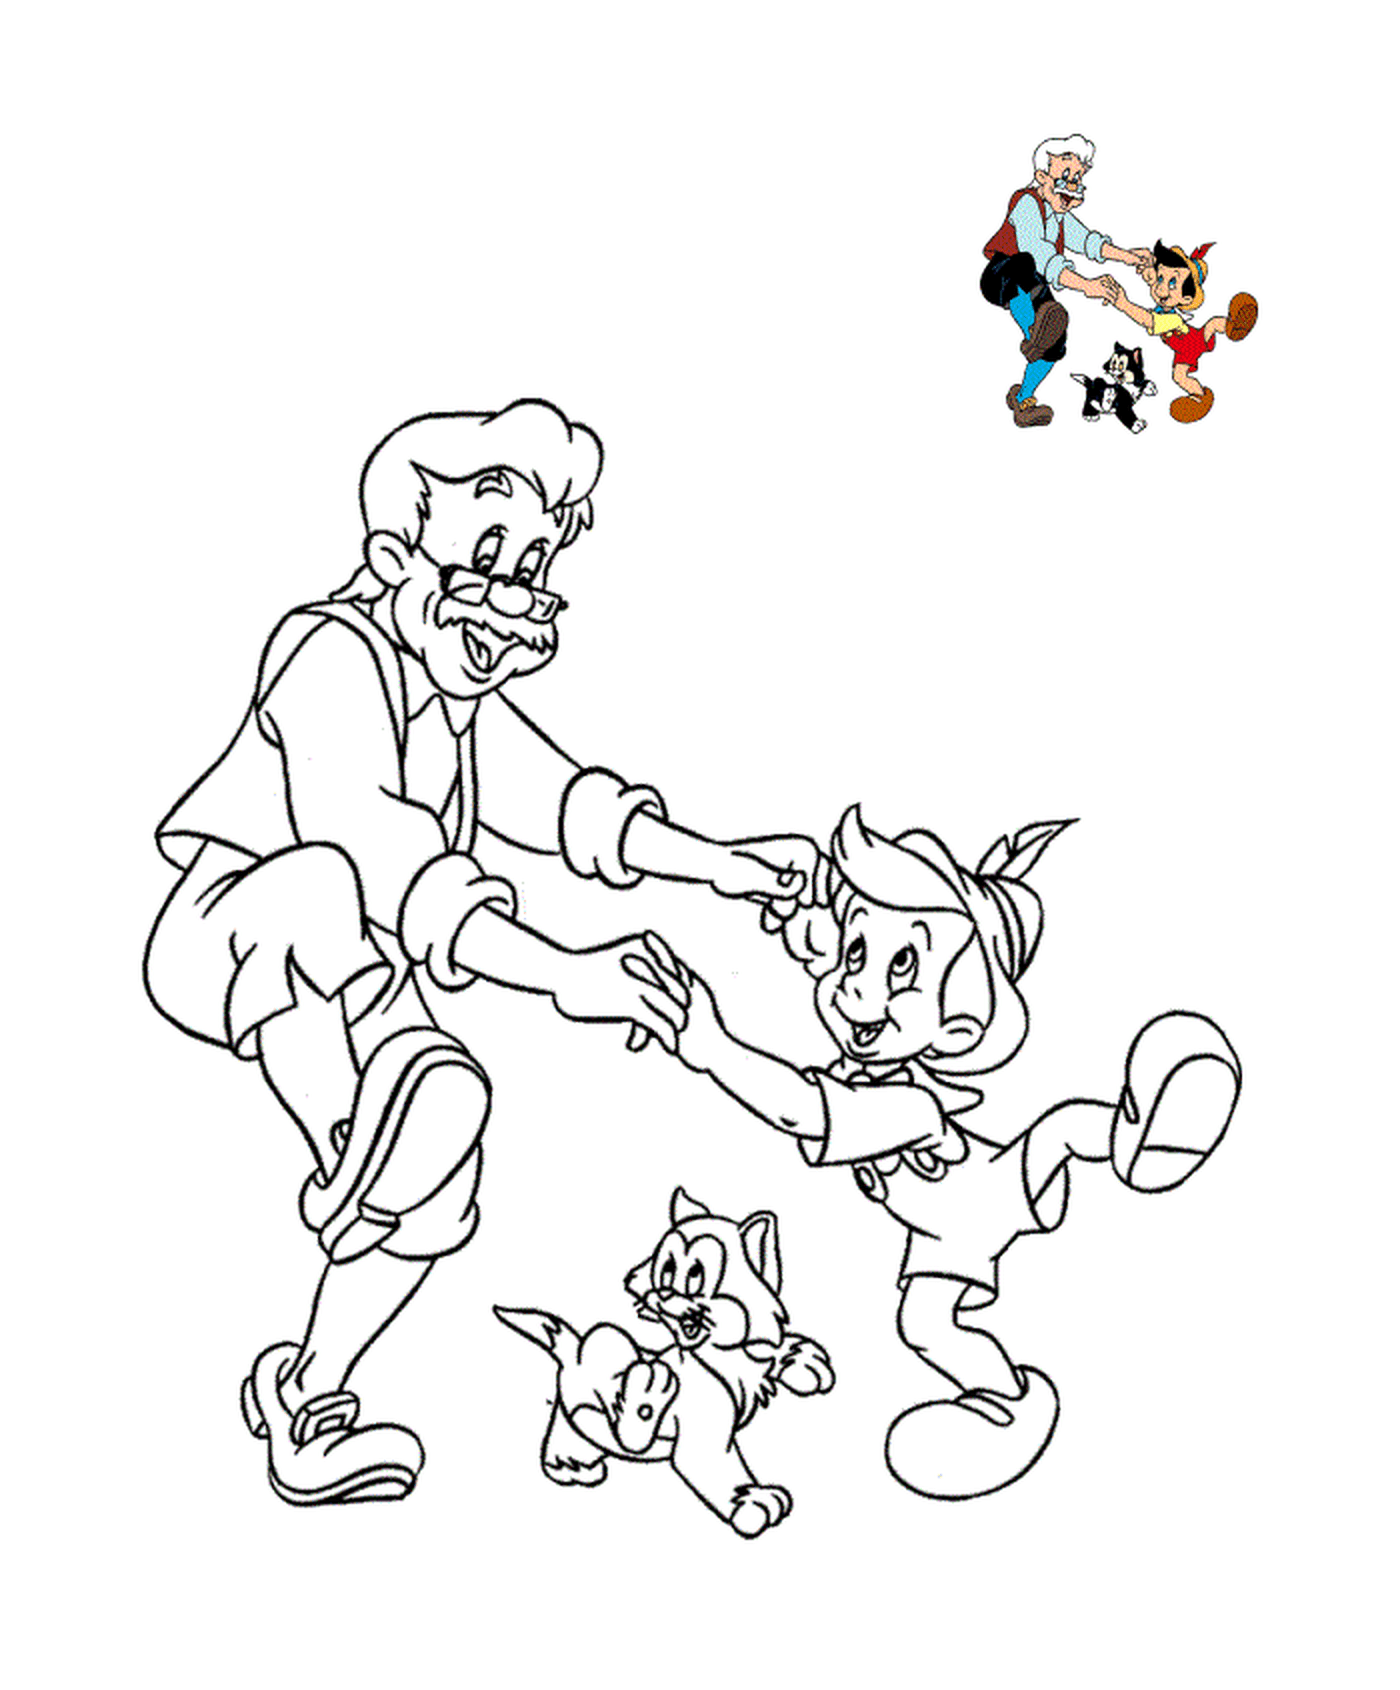  Pinocchio dance with Geppetto 